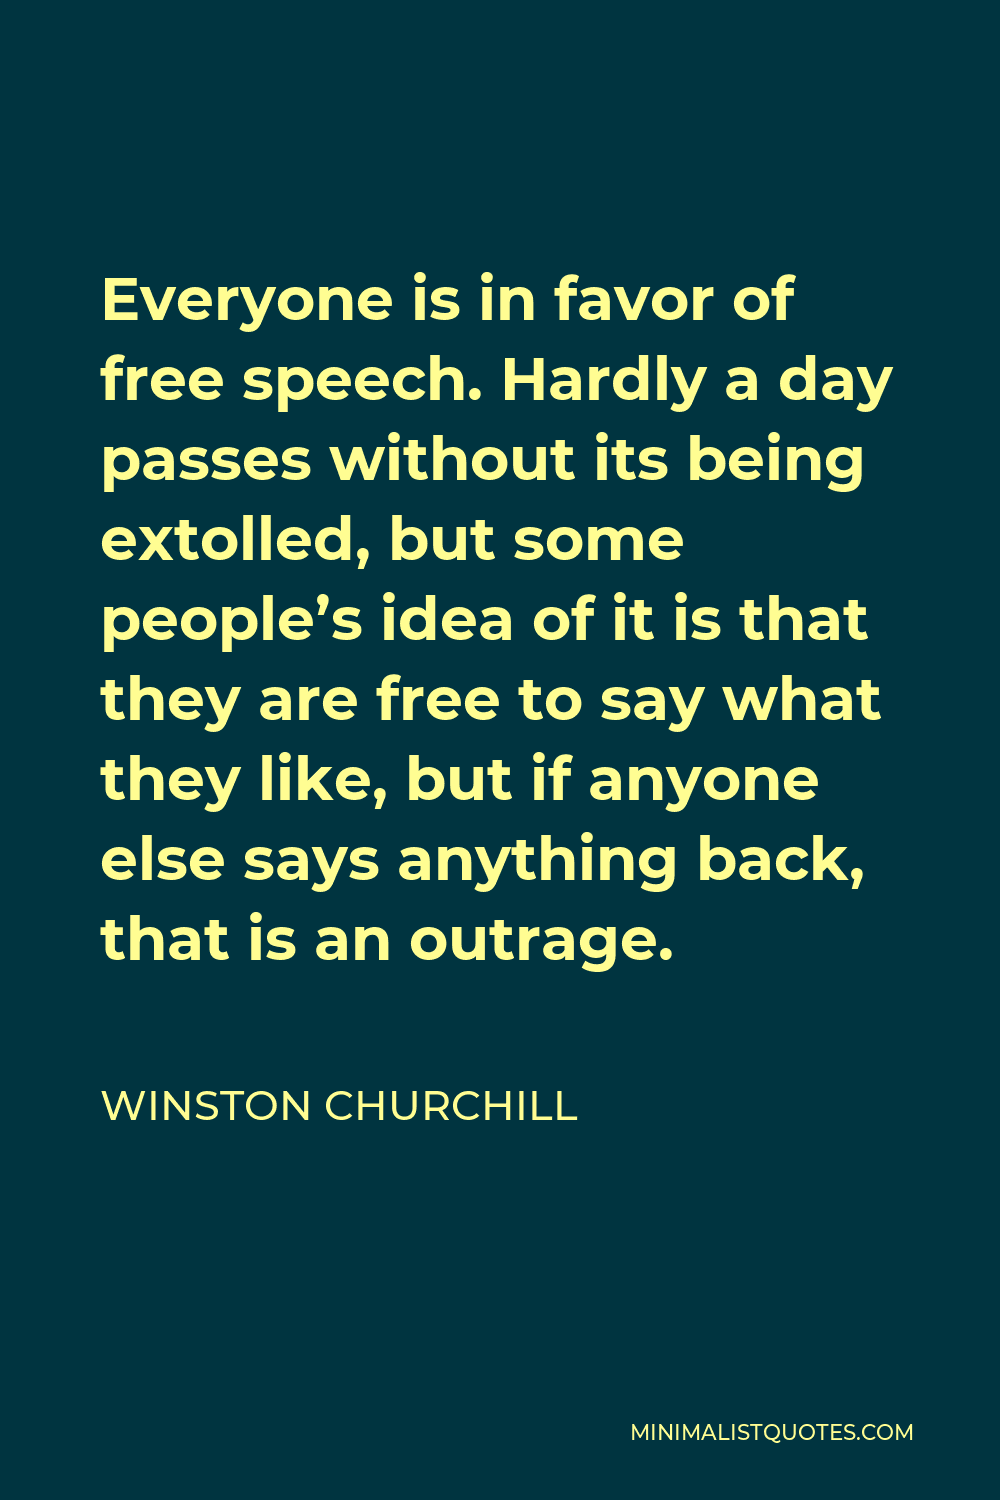 Winston Churchill Quote - Everyone is in favor of free speech. Hardly a day passes without its being extolled, but some people’s idea of it is that they are free to say what they like, but if anyone else says anything back, that is an outrage.